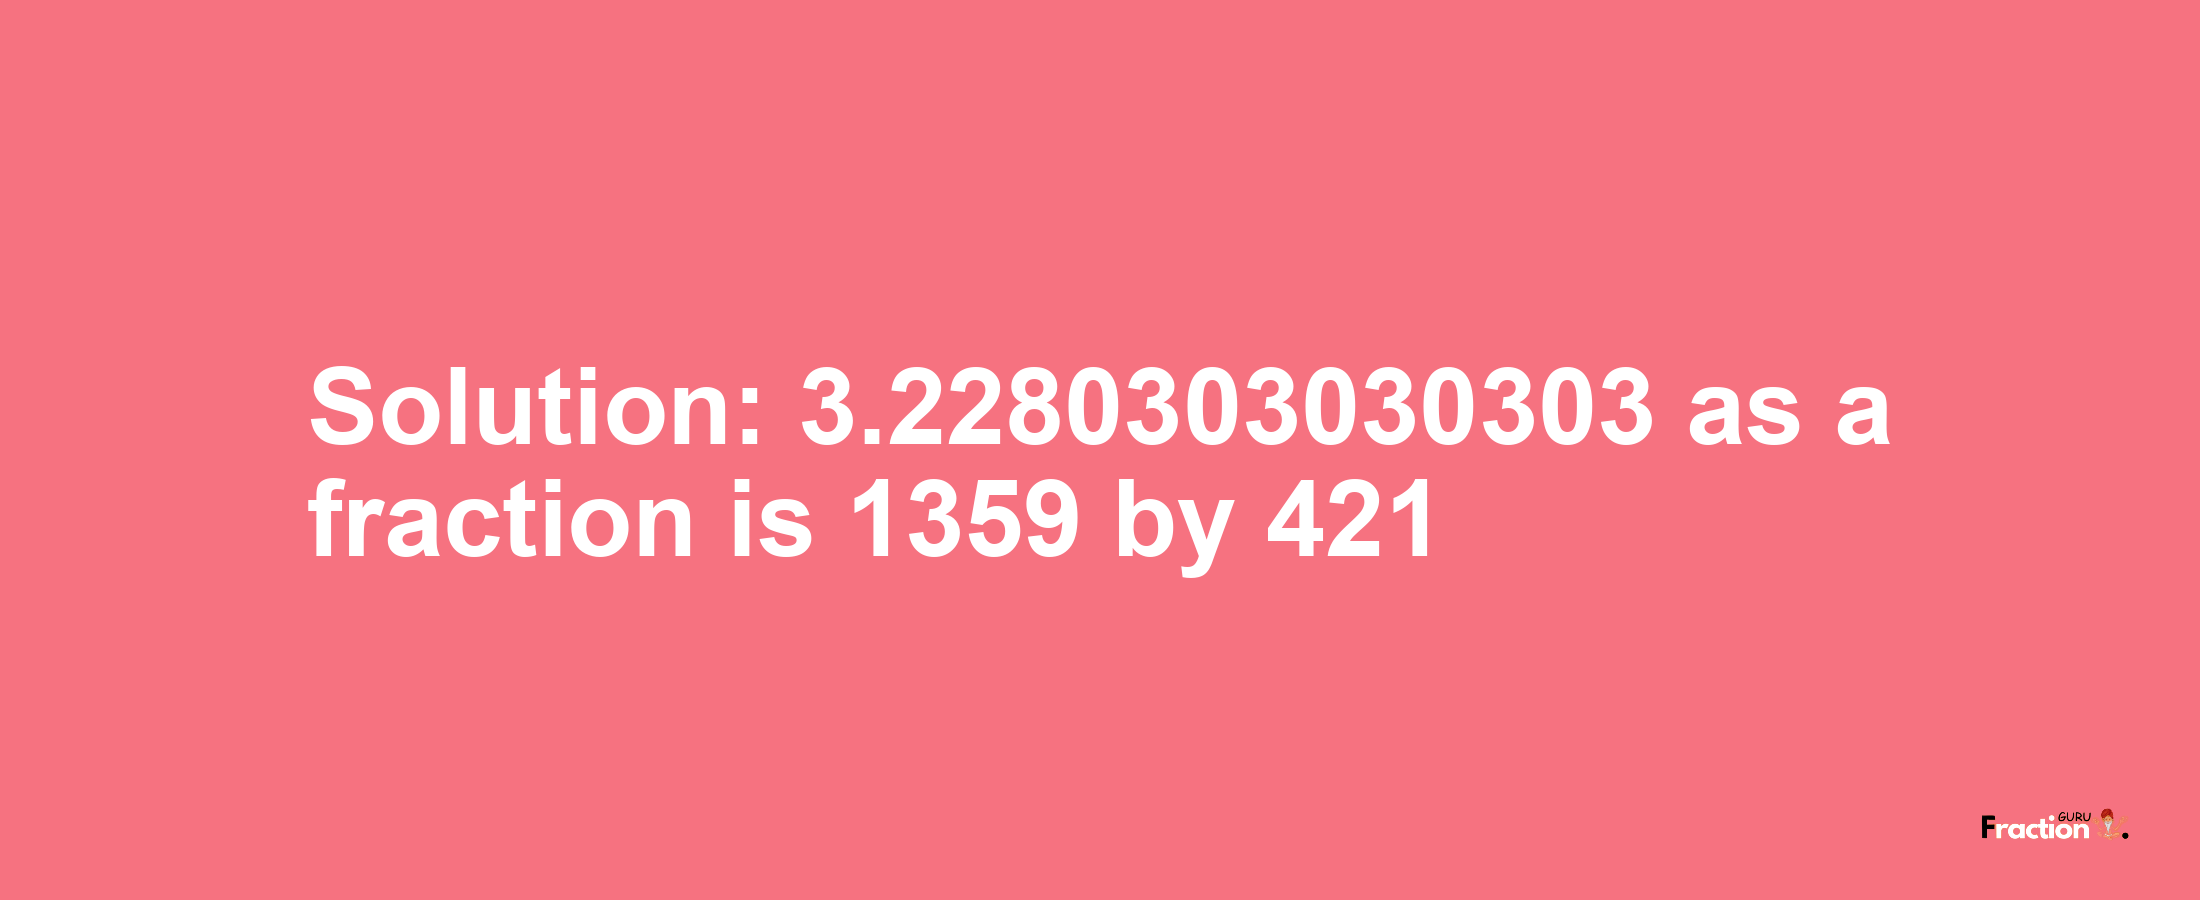 Solution:3.2280303030303 as a fraction is 1359/421